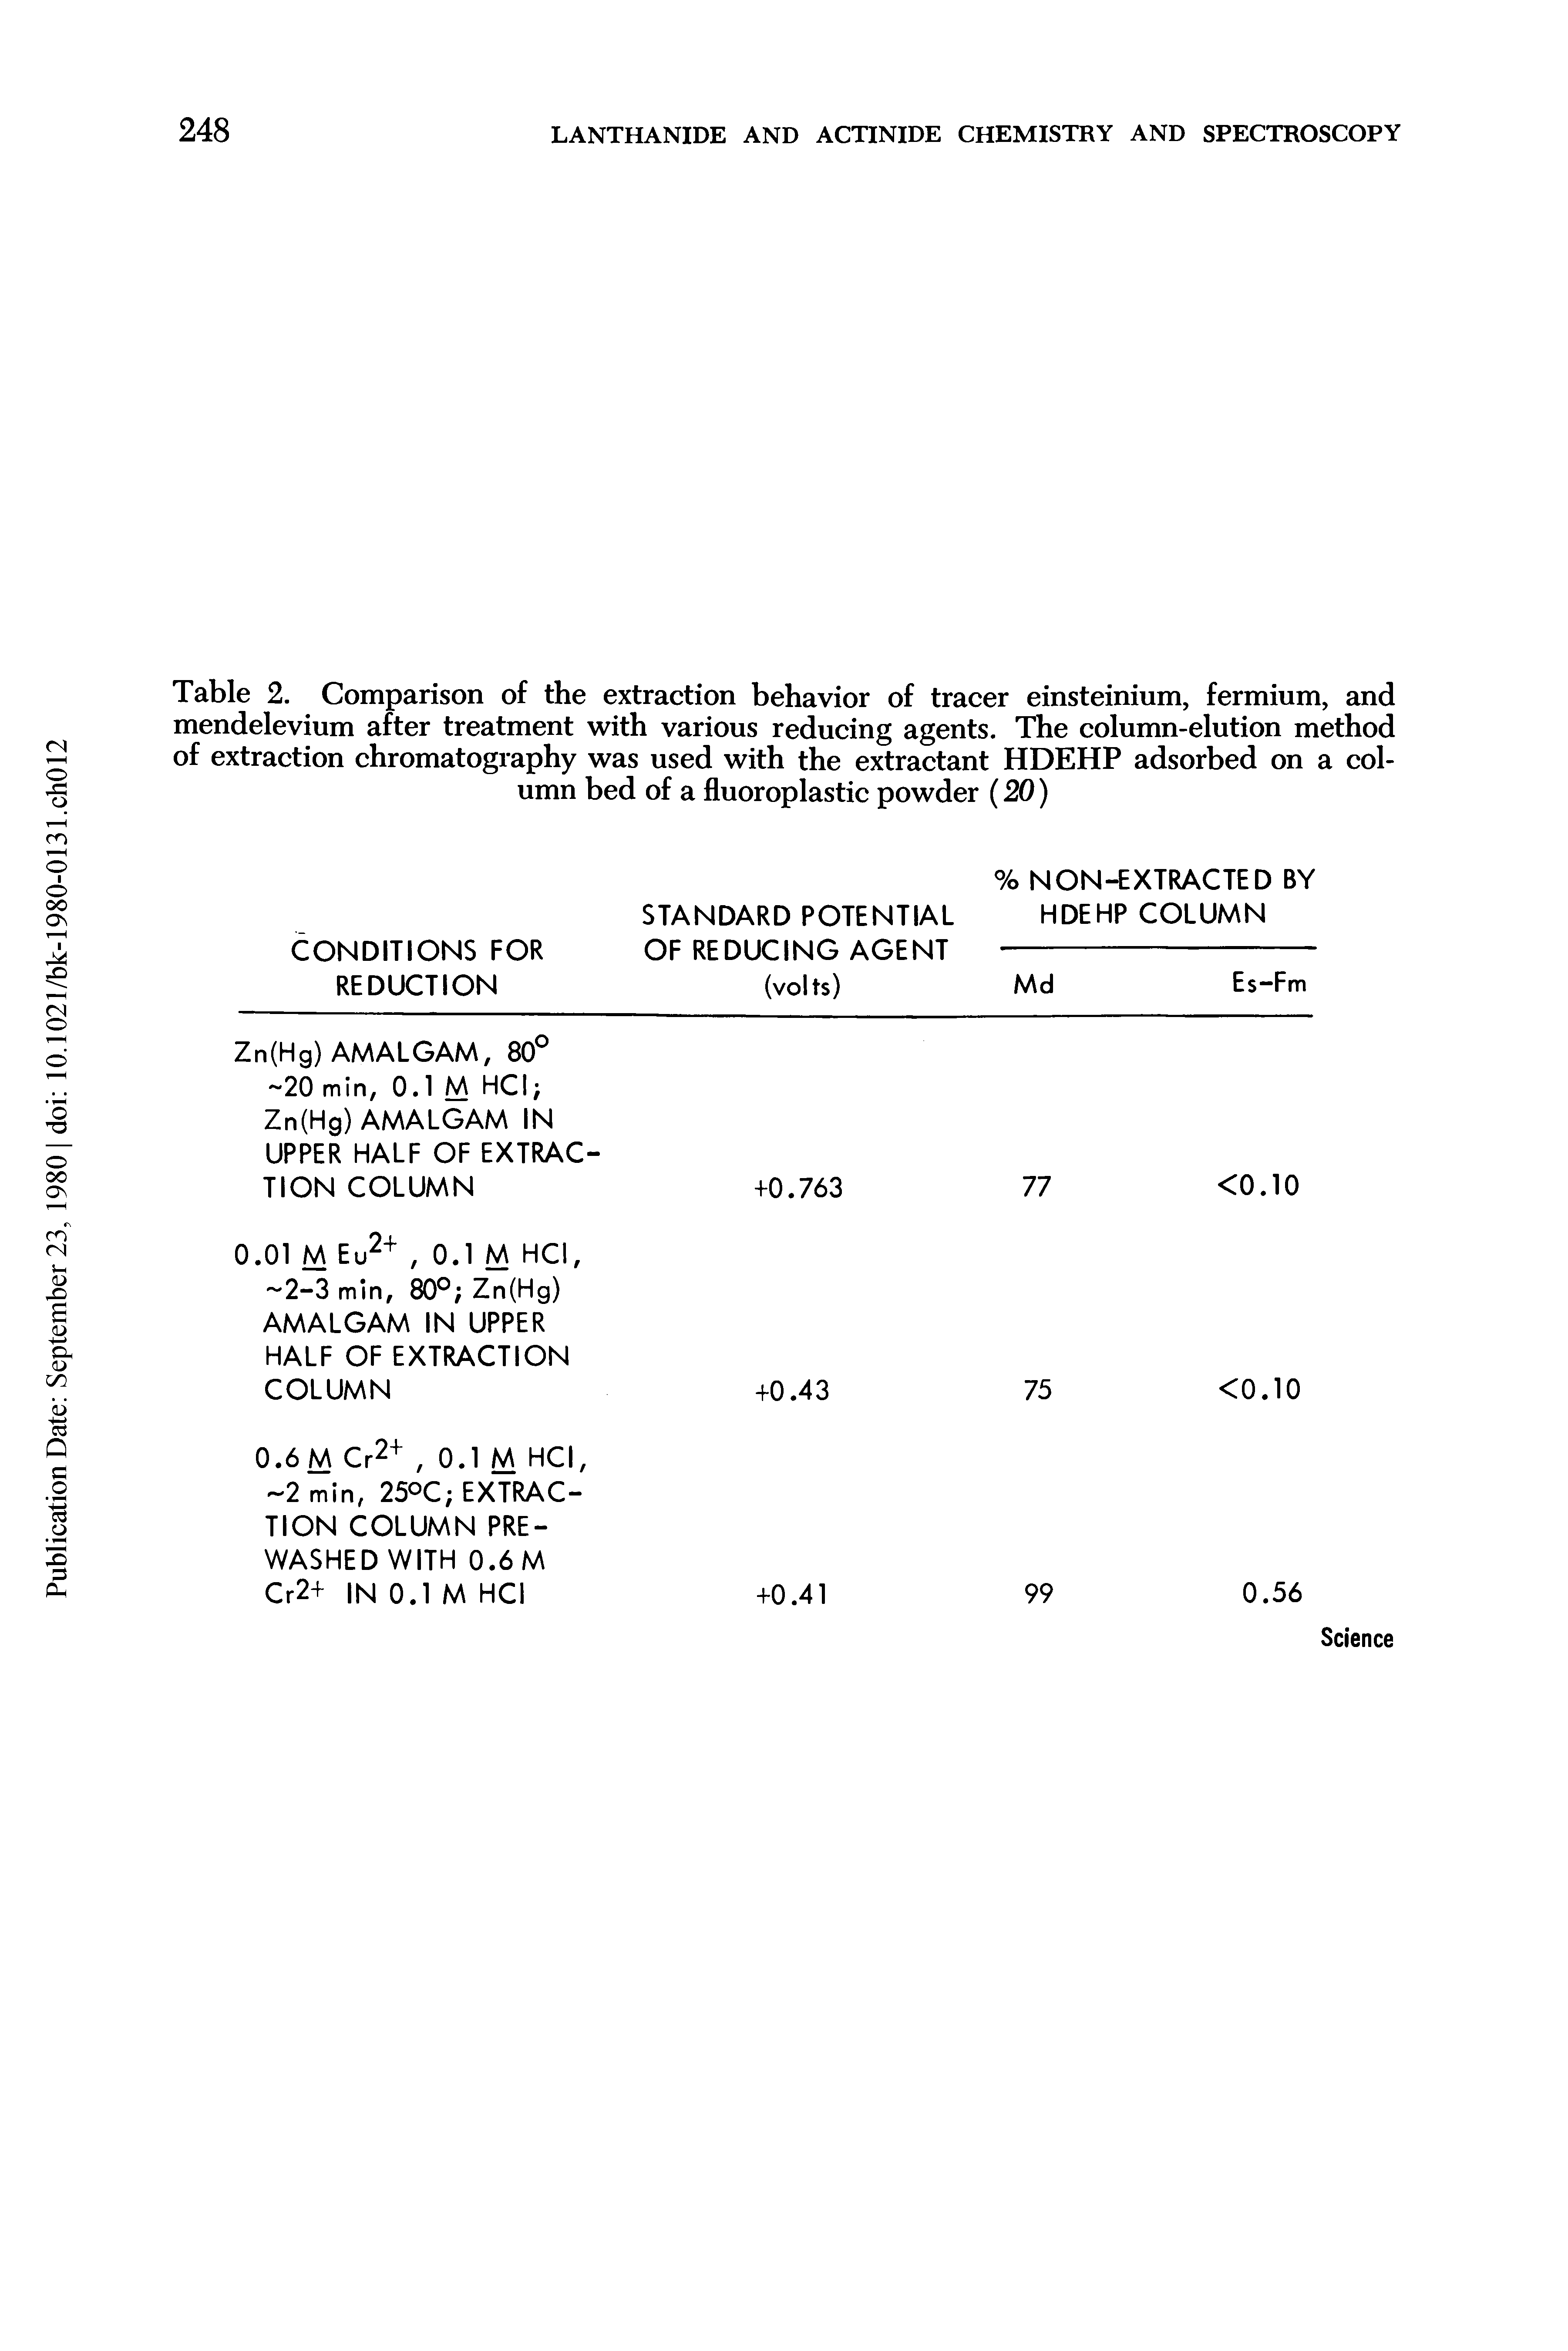 Table 2. Comparison of the extraction behavior of tracer einsteinium, fermium, and mendelevium after treatment with various reducing agents. The column-elution method of extraction chromatography was used with the extractant HDEHP adsorbed on a column bed of a fluoroplastic powder (20)...